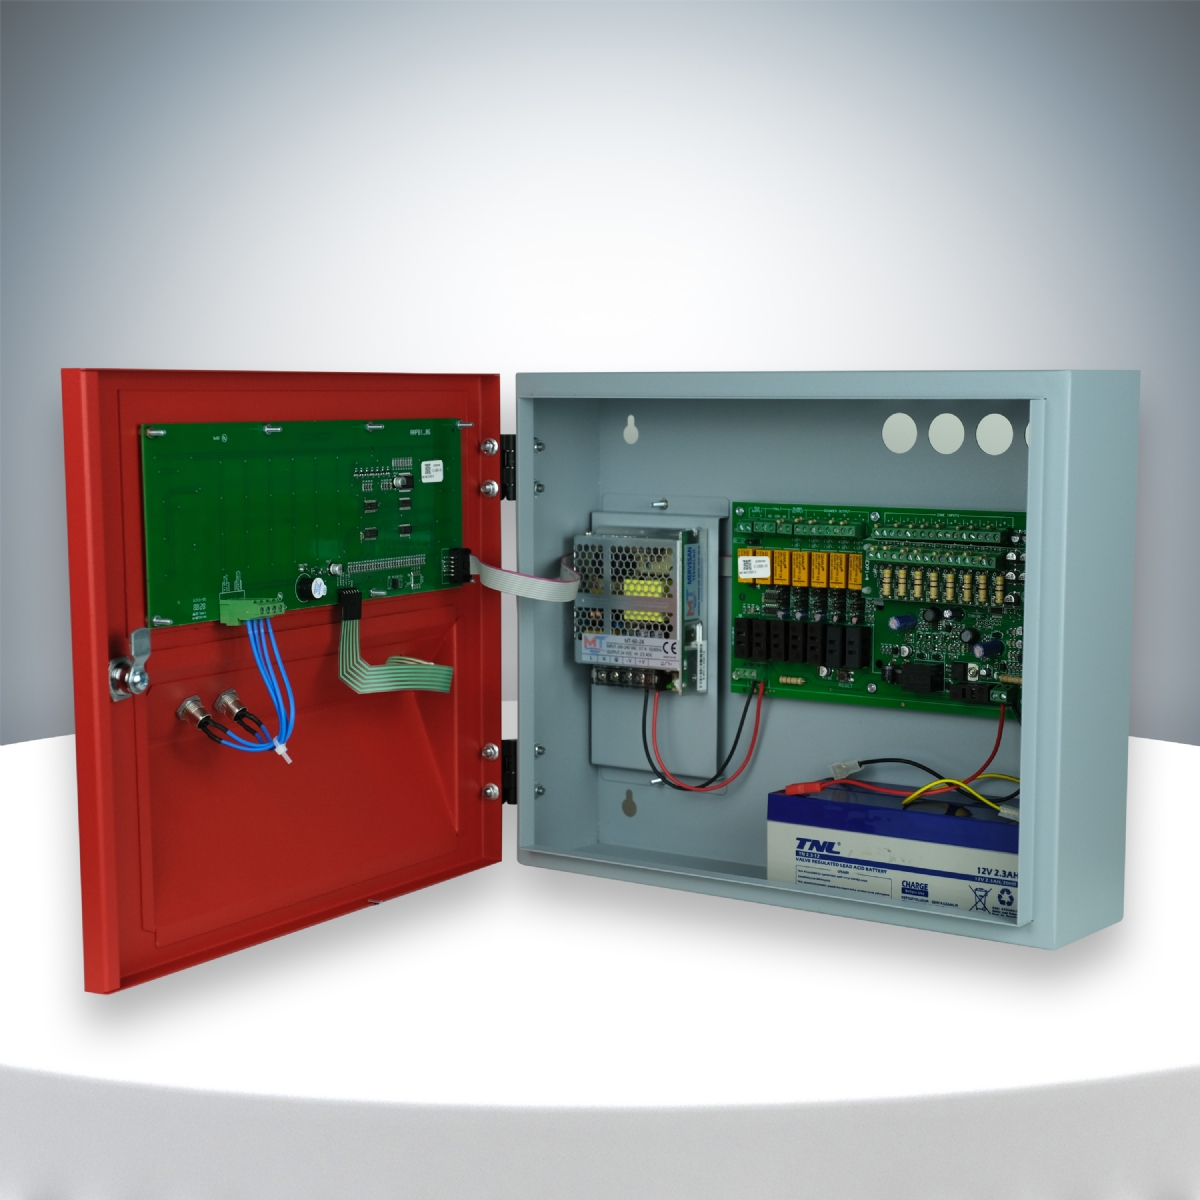 C-1000-8R (Repeater) 8 Zone Conventional Repeater Panel